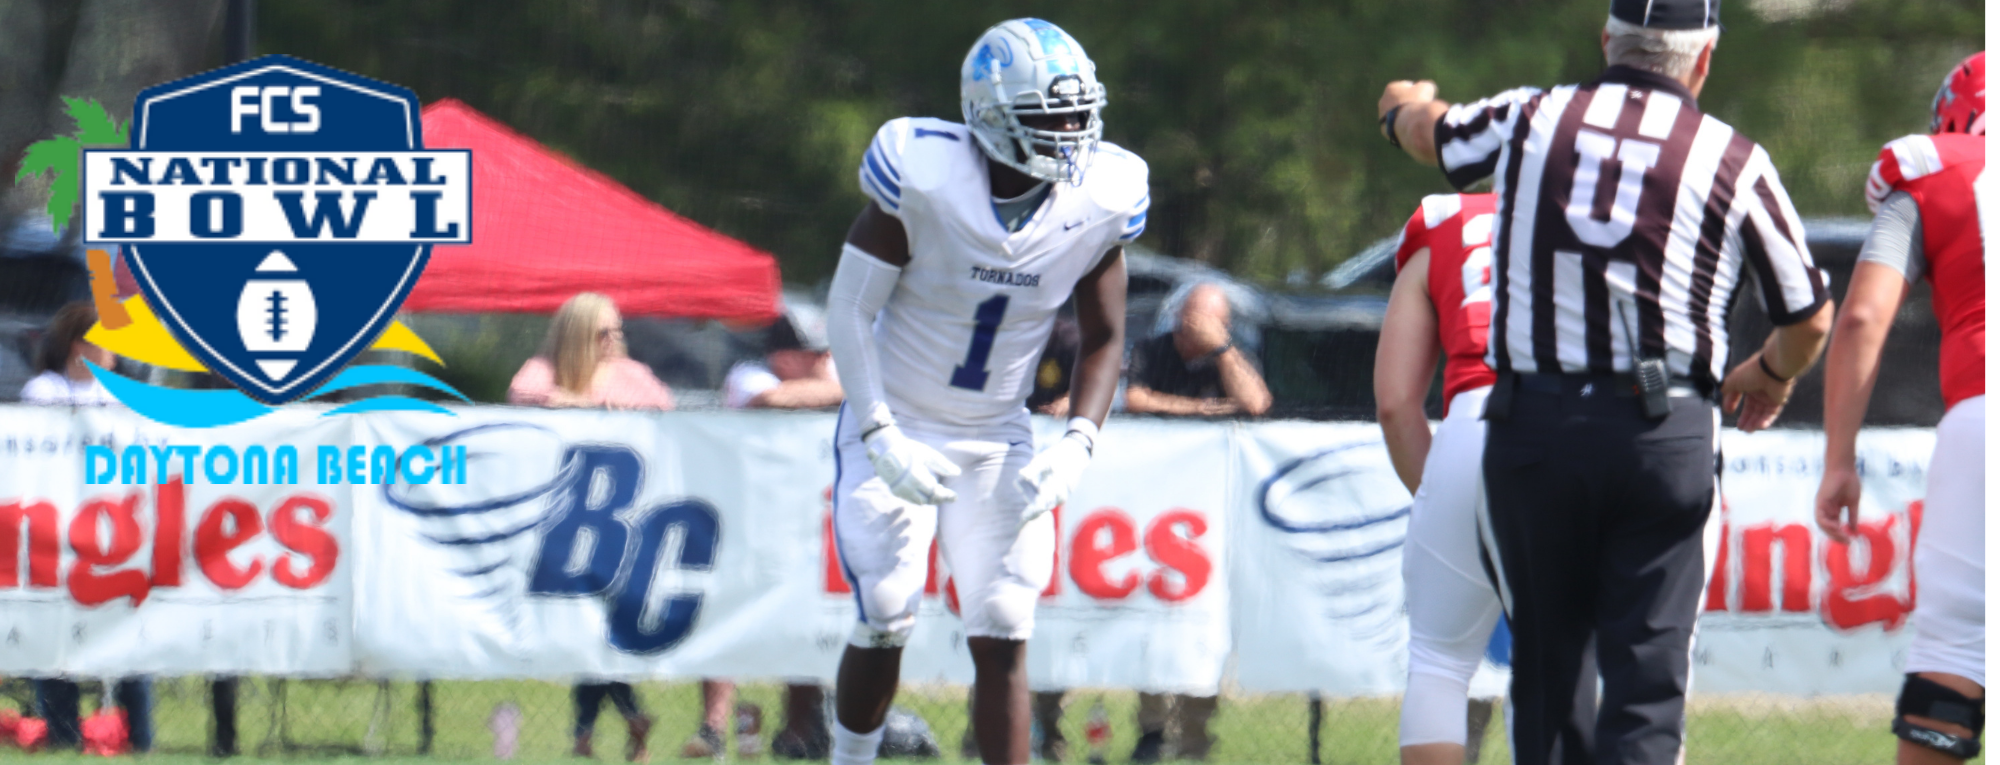 Canady to Represent Brevard College at FCS Bowl in Daytona Beach